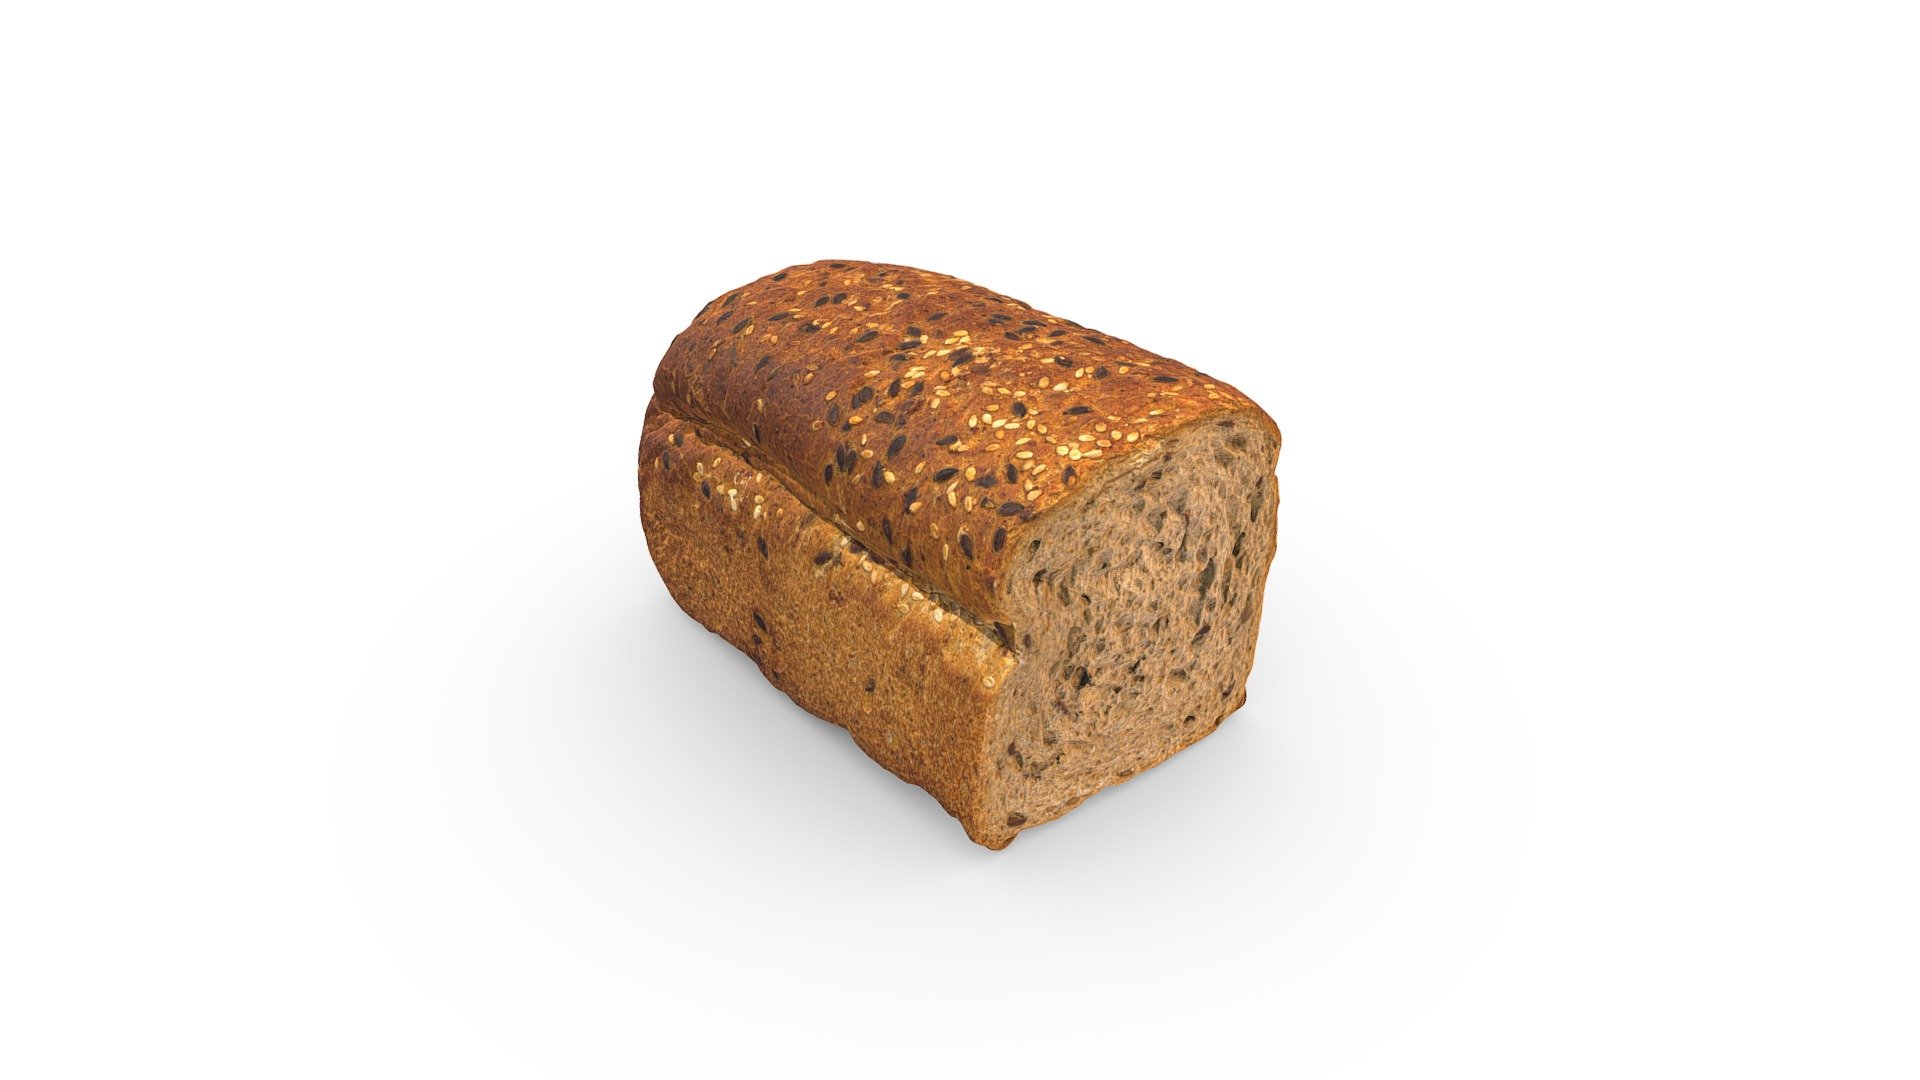 High-poly bread with sunflower seeds photogrammetry scan. PBR texture maps 4096x4096 px. resolution for metallic or specular workflow. Scan from real food, high-poly 3D model, 4K resolution textures 3d model